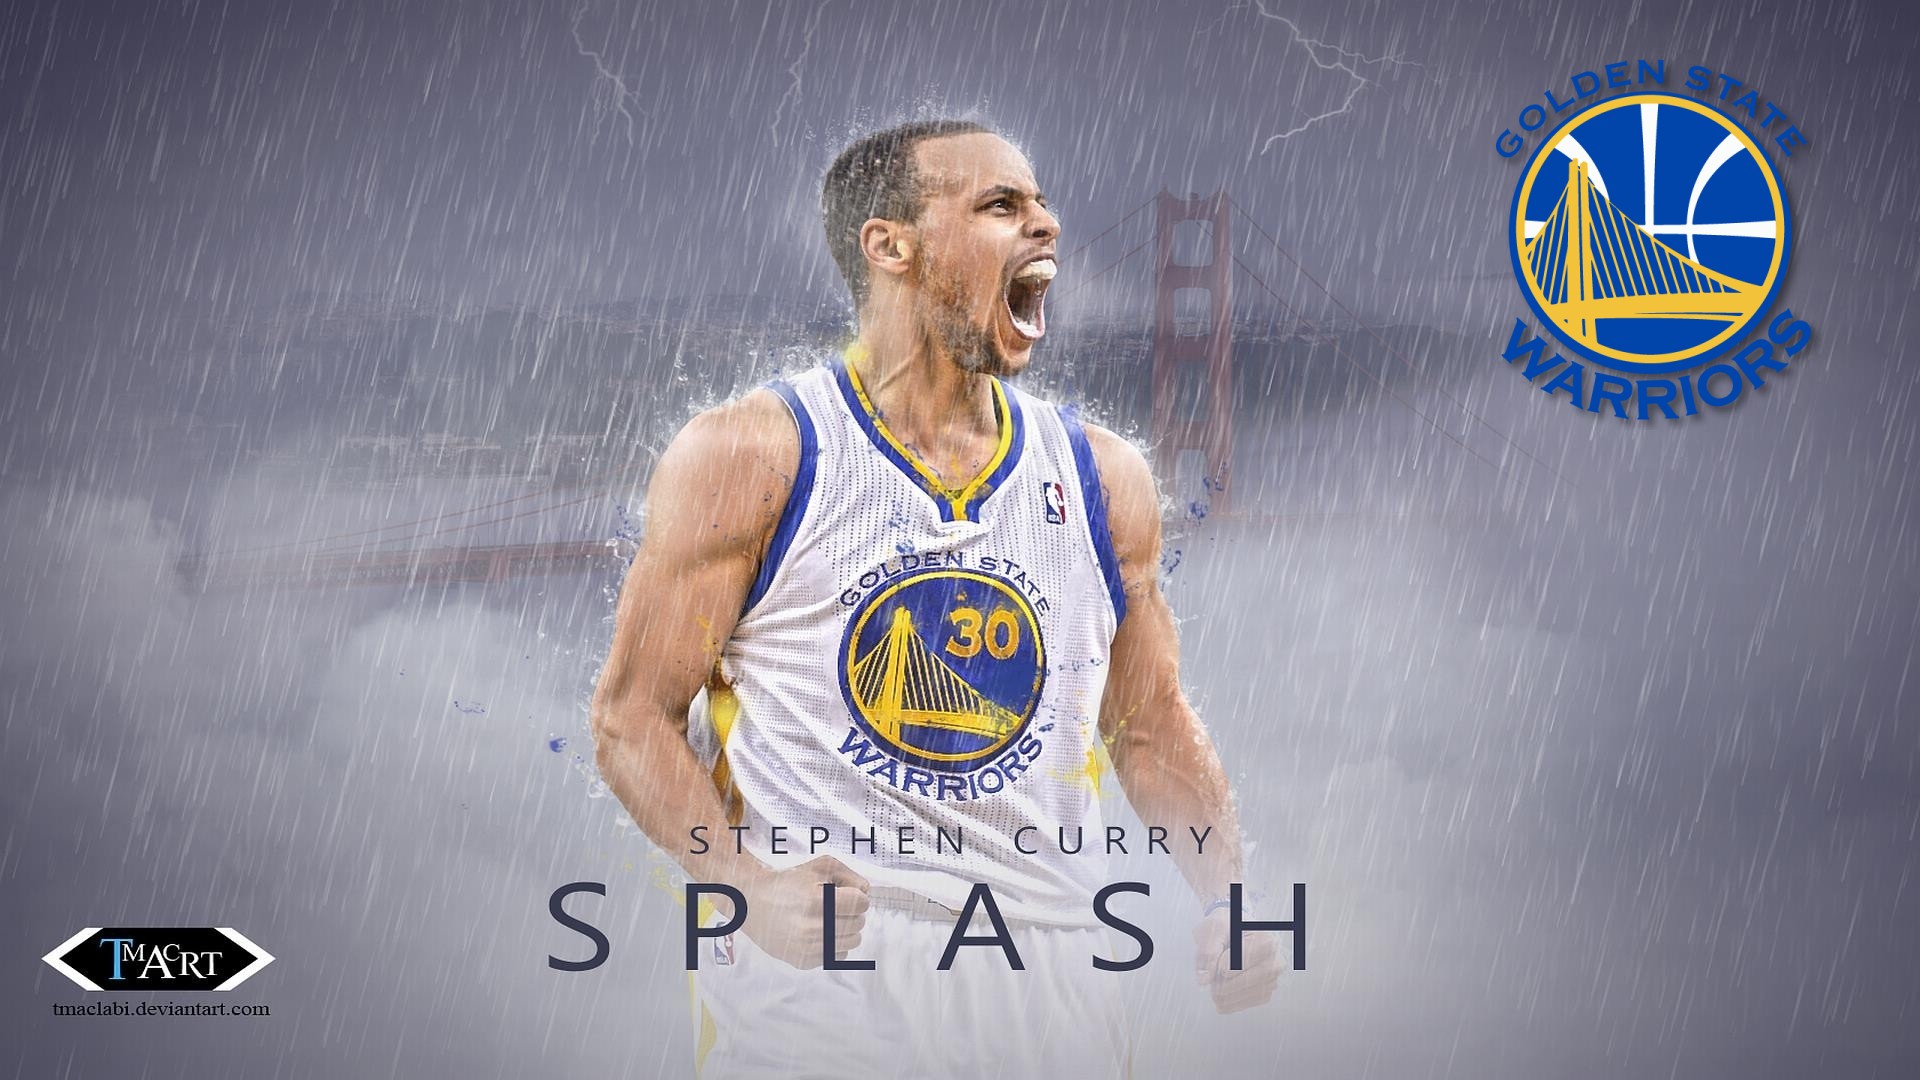 Stephen Curry Desktop Wallpapers with image dimensions 1920x1080 pixel. You can make this wallpaper for your Desktop Computer Backgrounds, Windows or Mac Screensavers, iPhone Lock screen, Tablet or Android and another Mobile Phone device